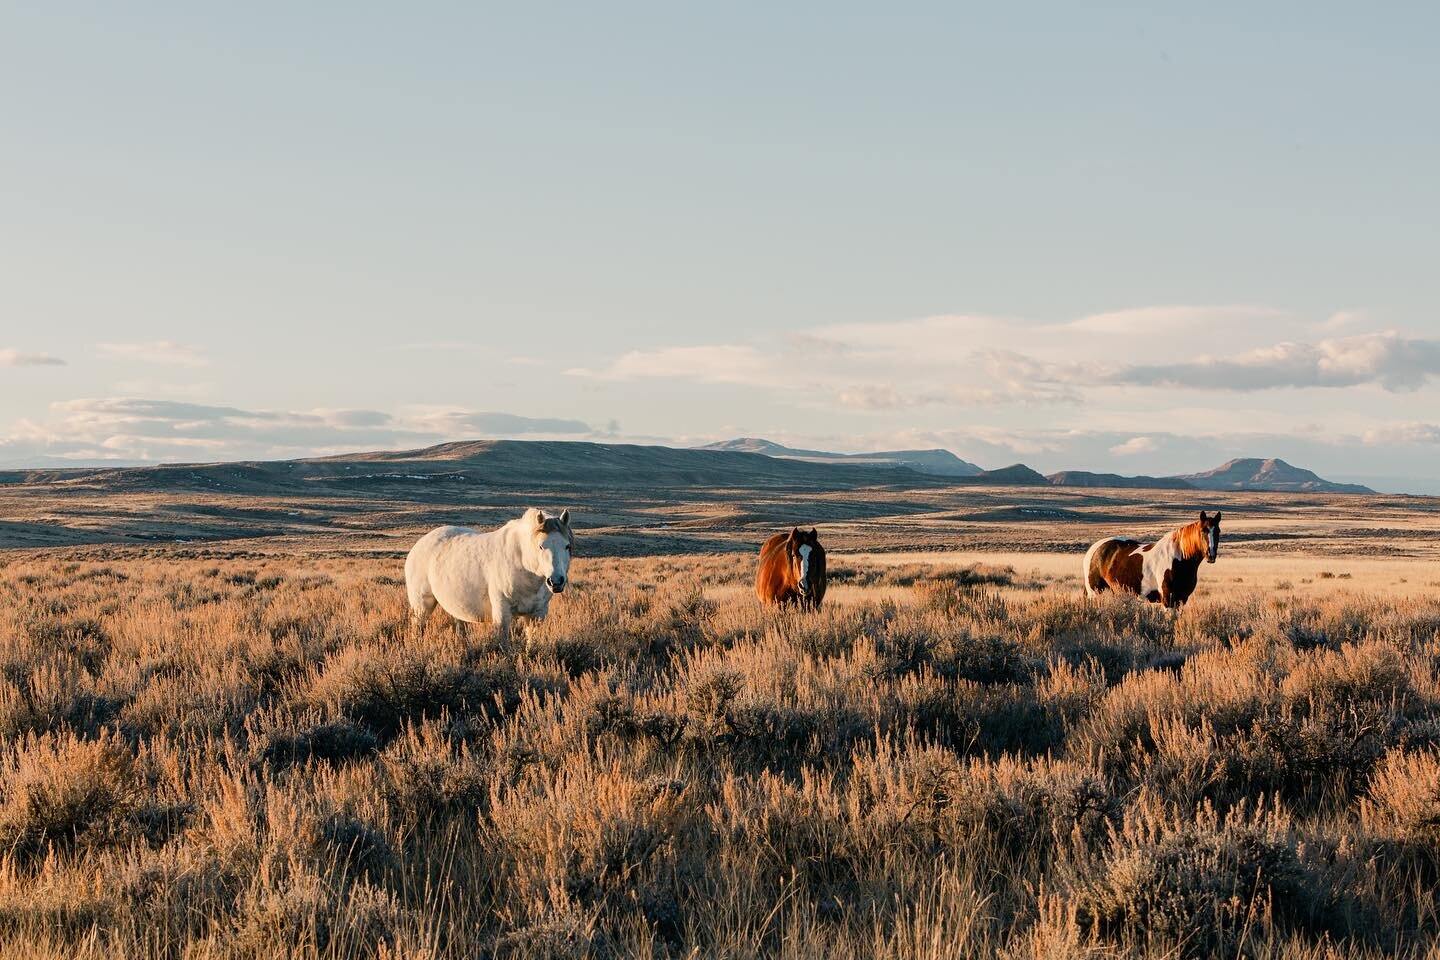 Celebrating the shortest day of the year&hellip; the only way I know how&hellip;. chasing light and wild horses.